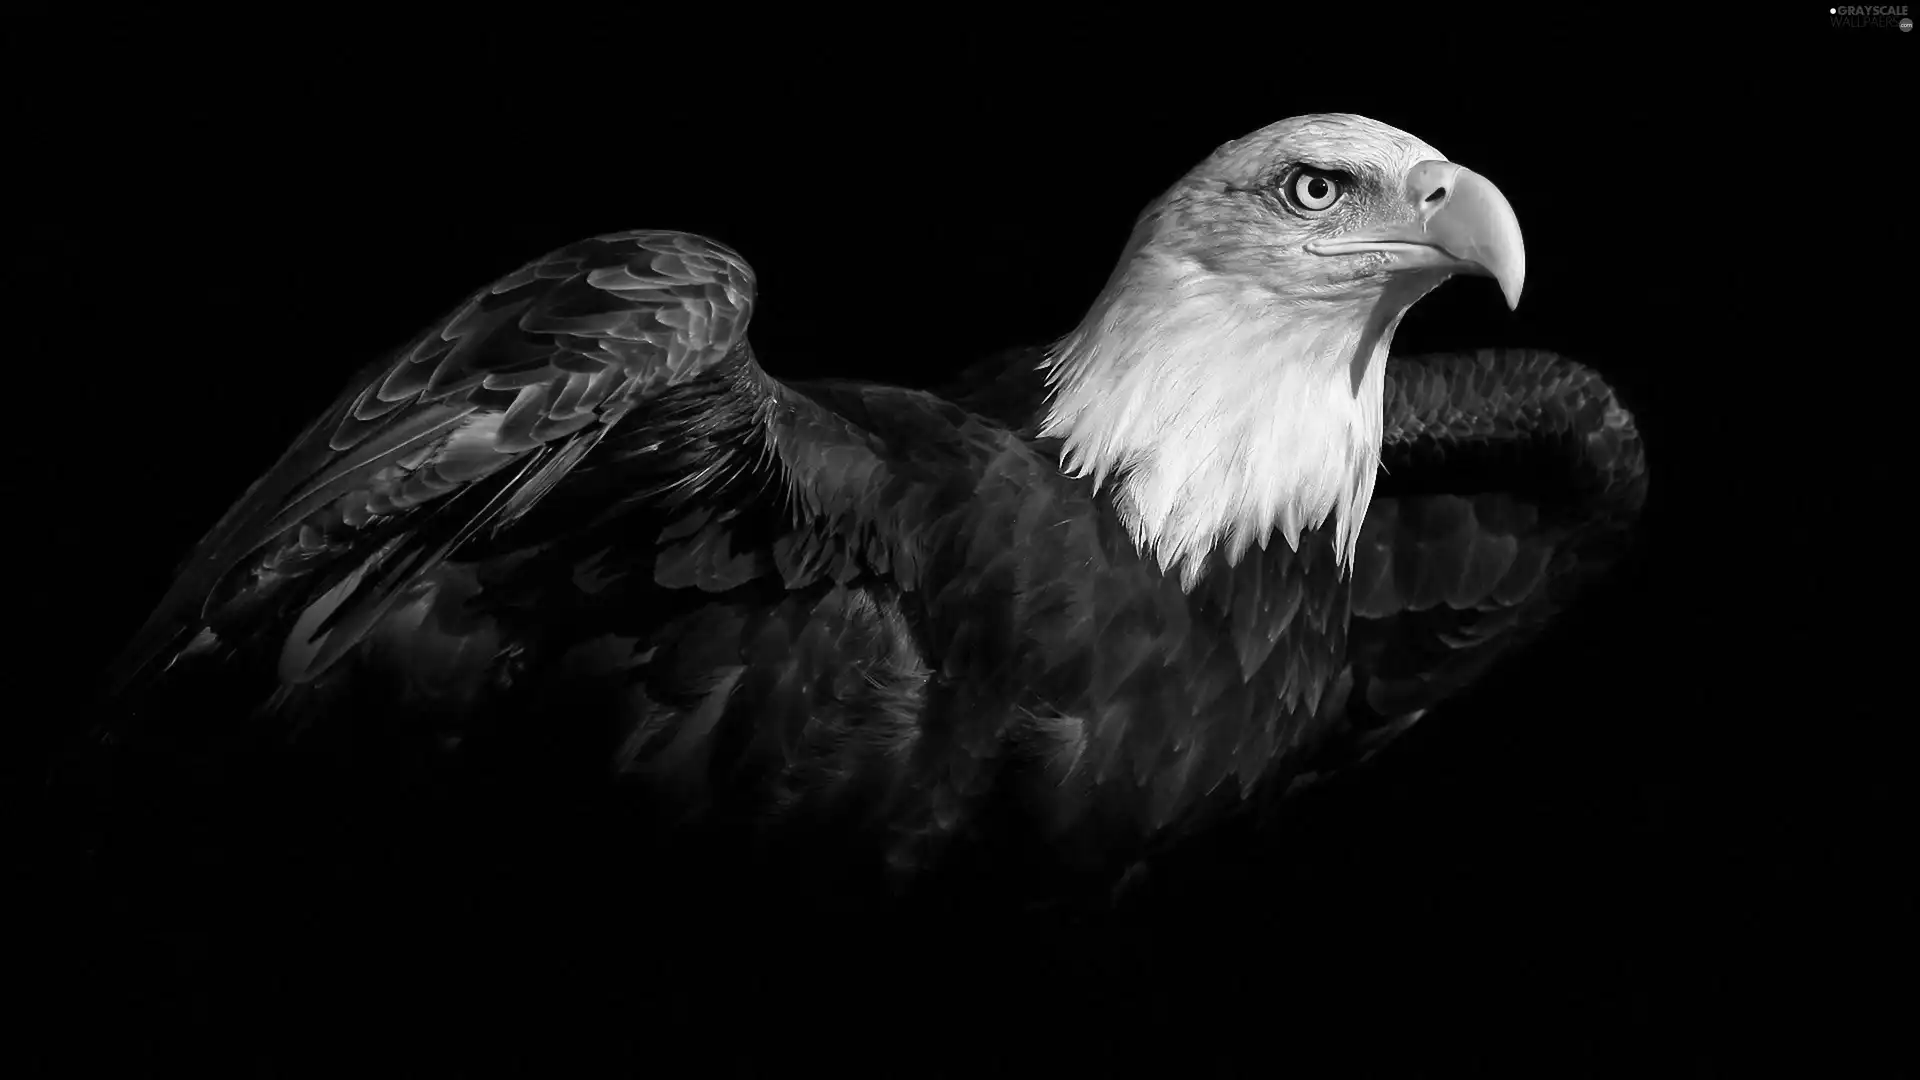 American Bald Eagle, nose, wings